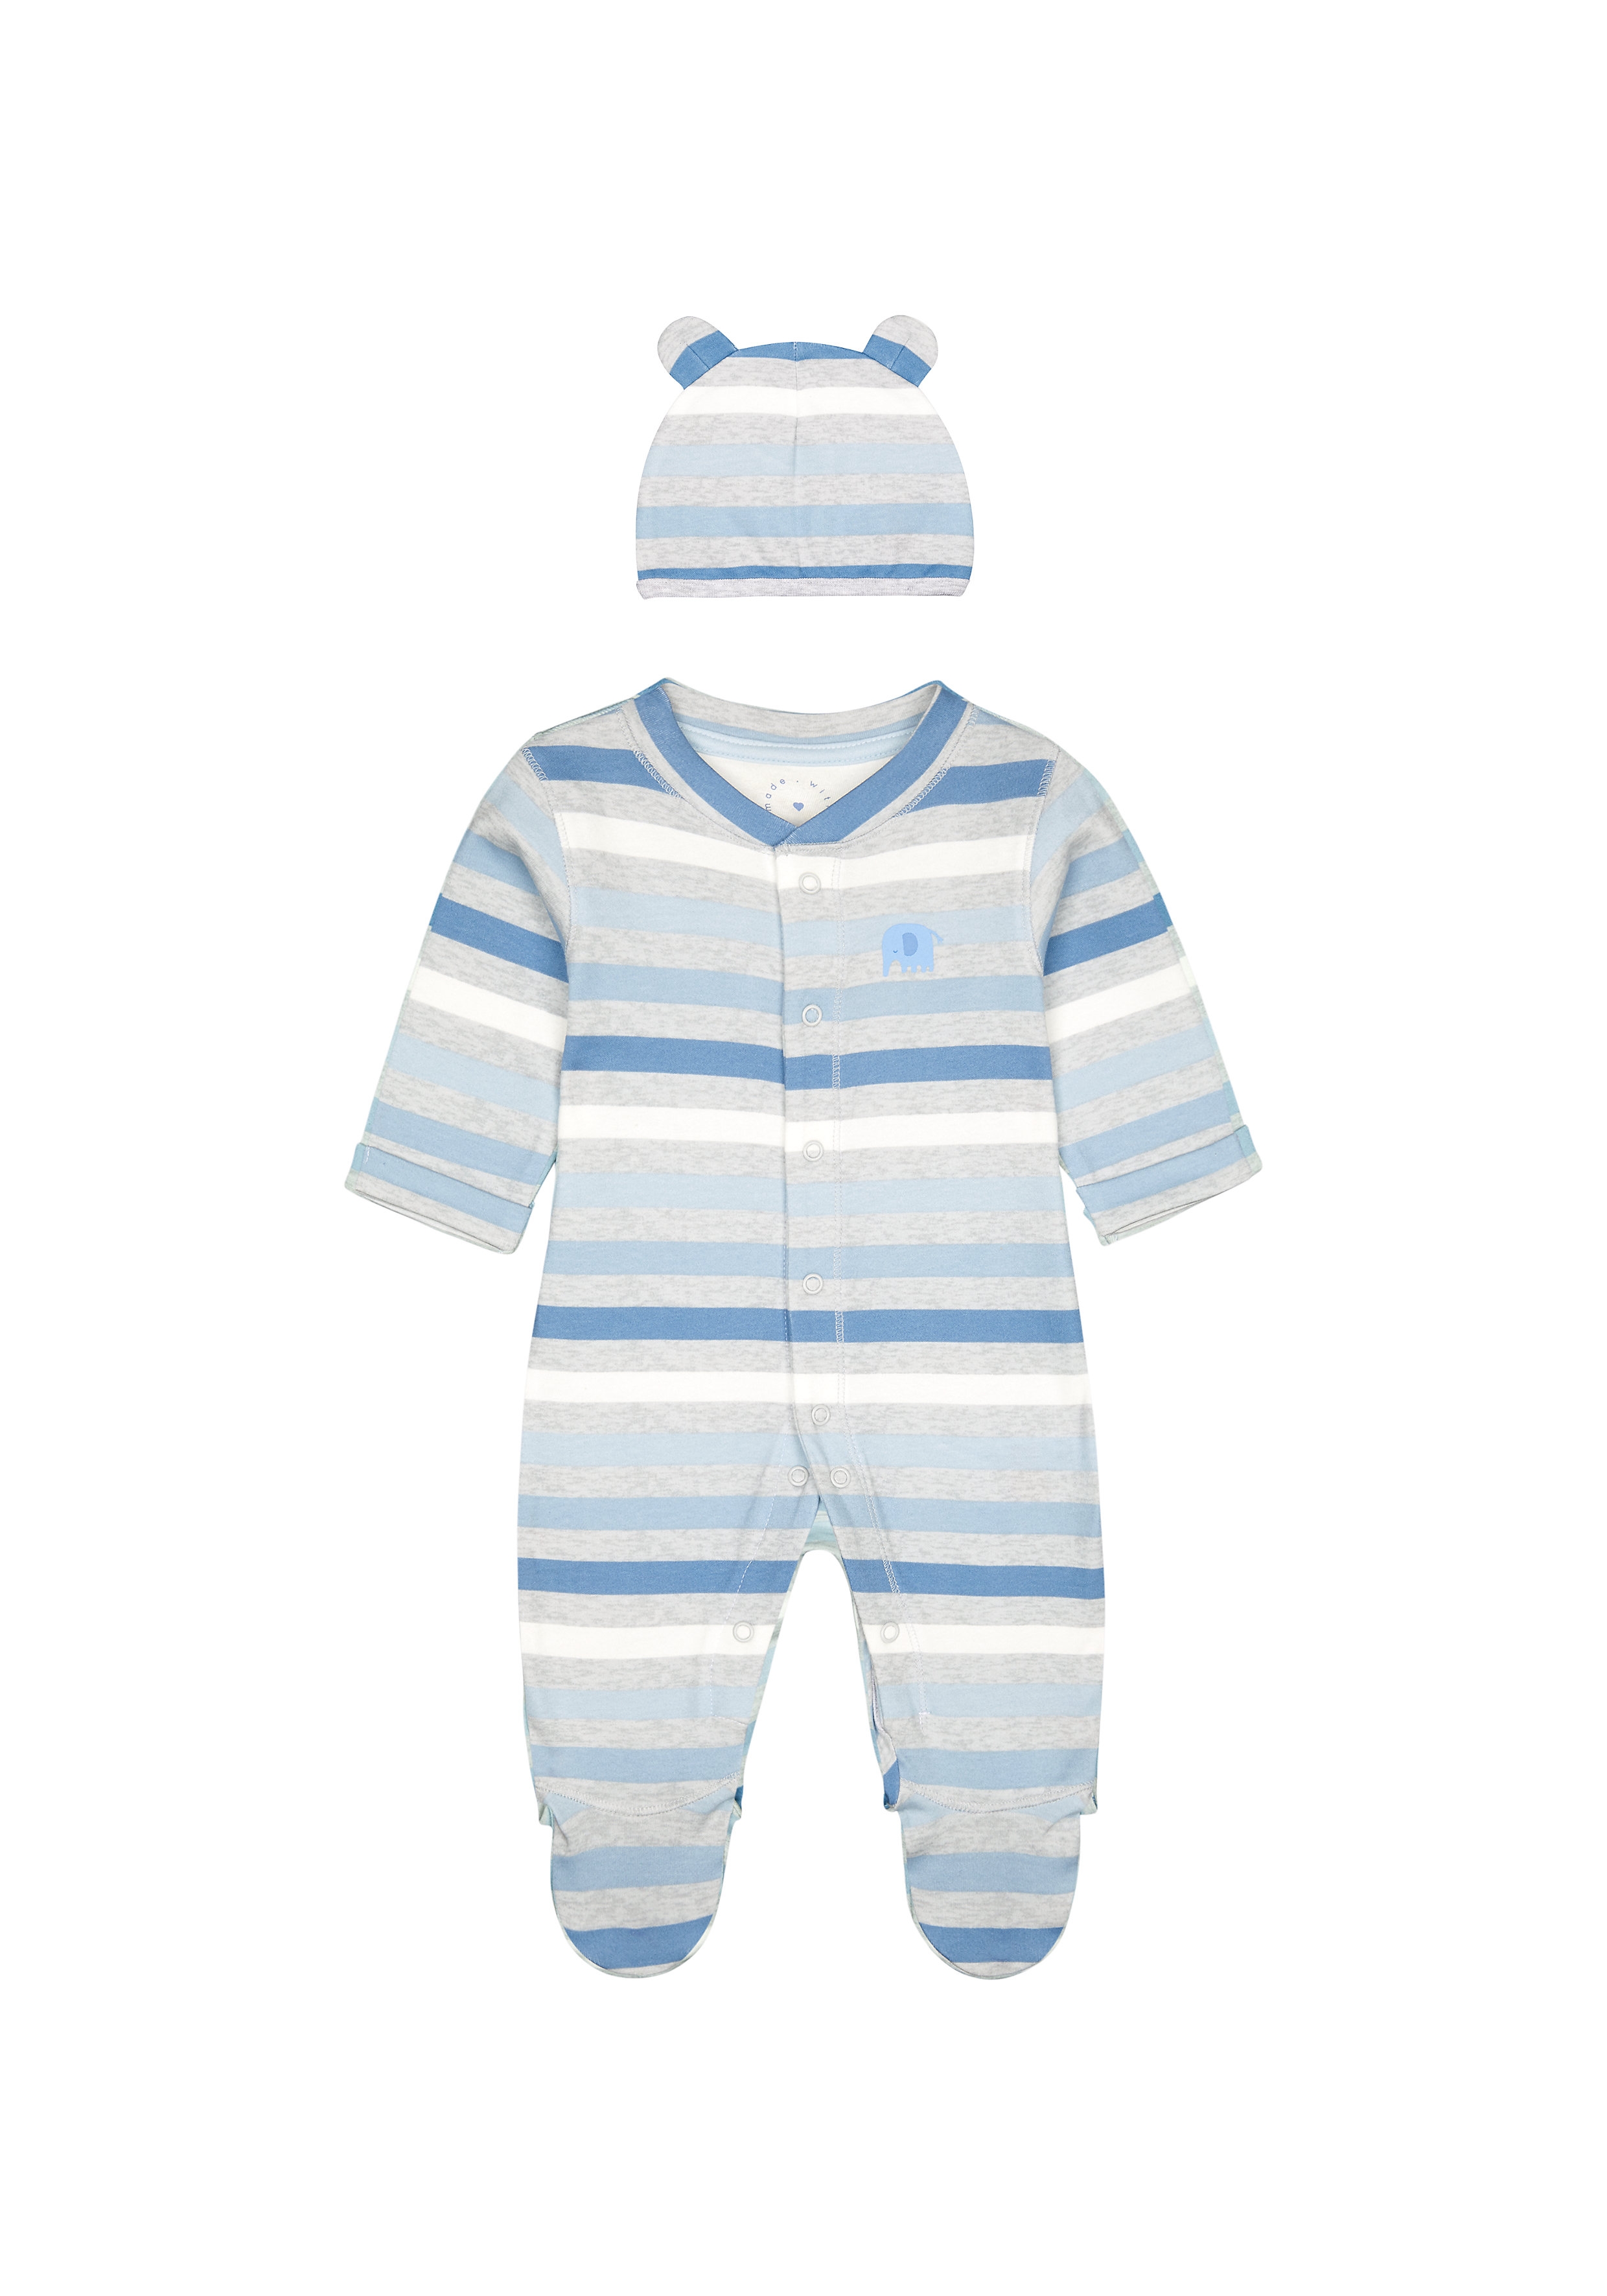 Boys Full Sleeves Romper With Hat Striped And 3D Ear Detail - Blue